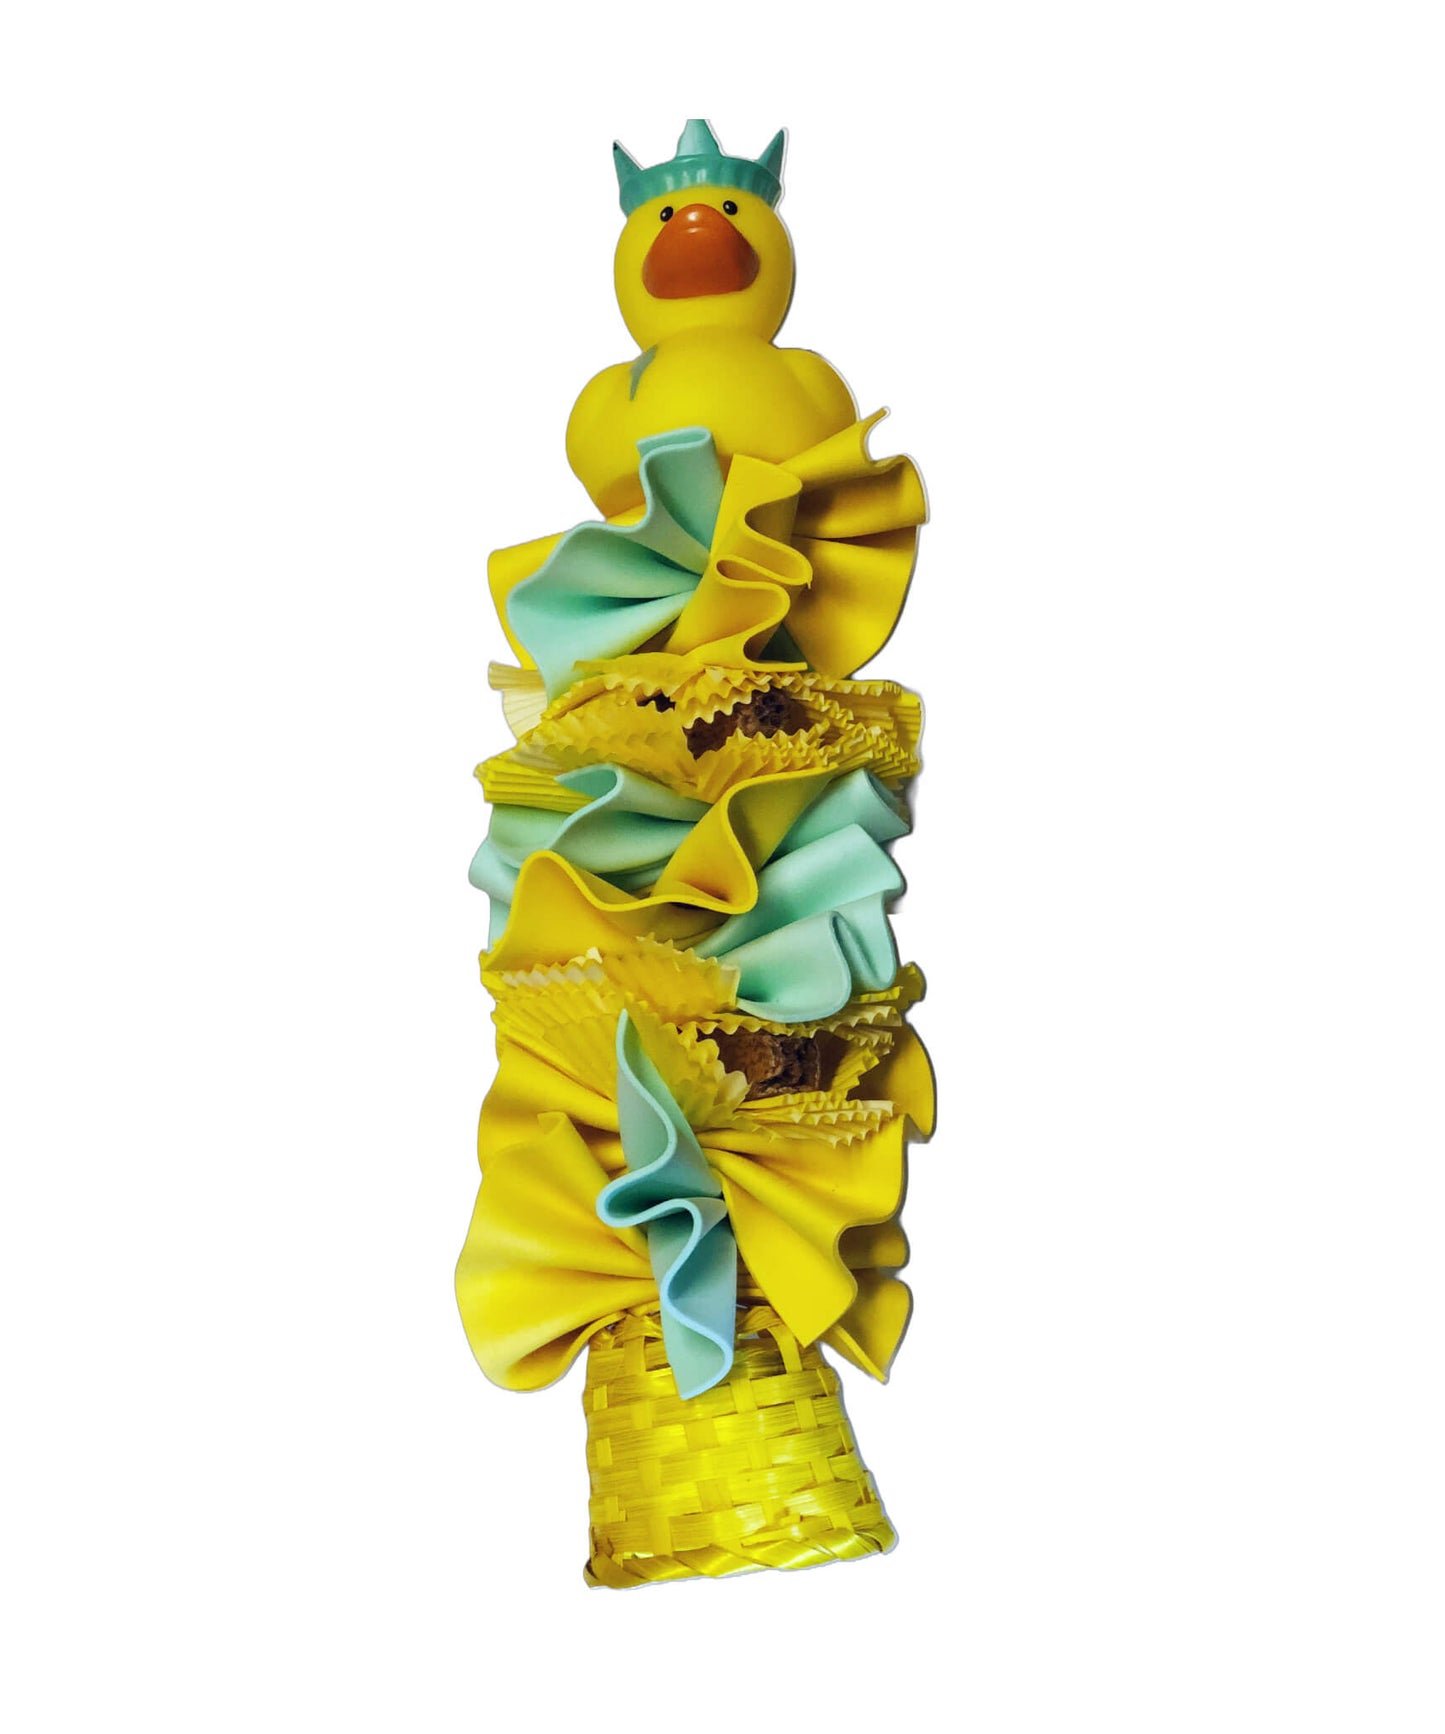 Foam bird toy with yellow and teal